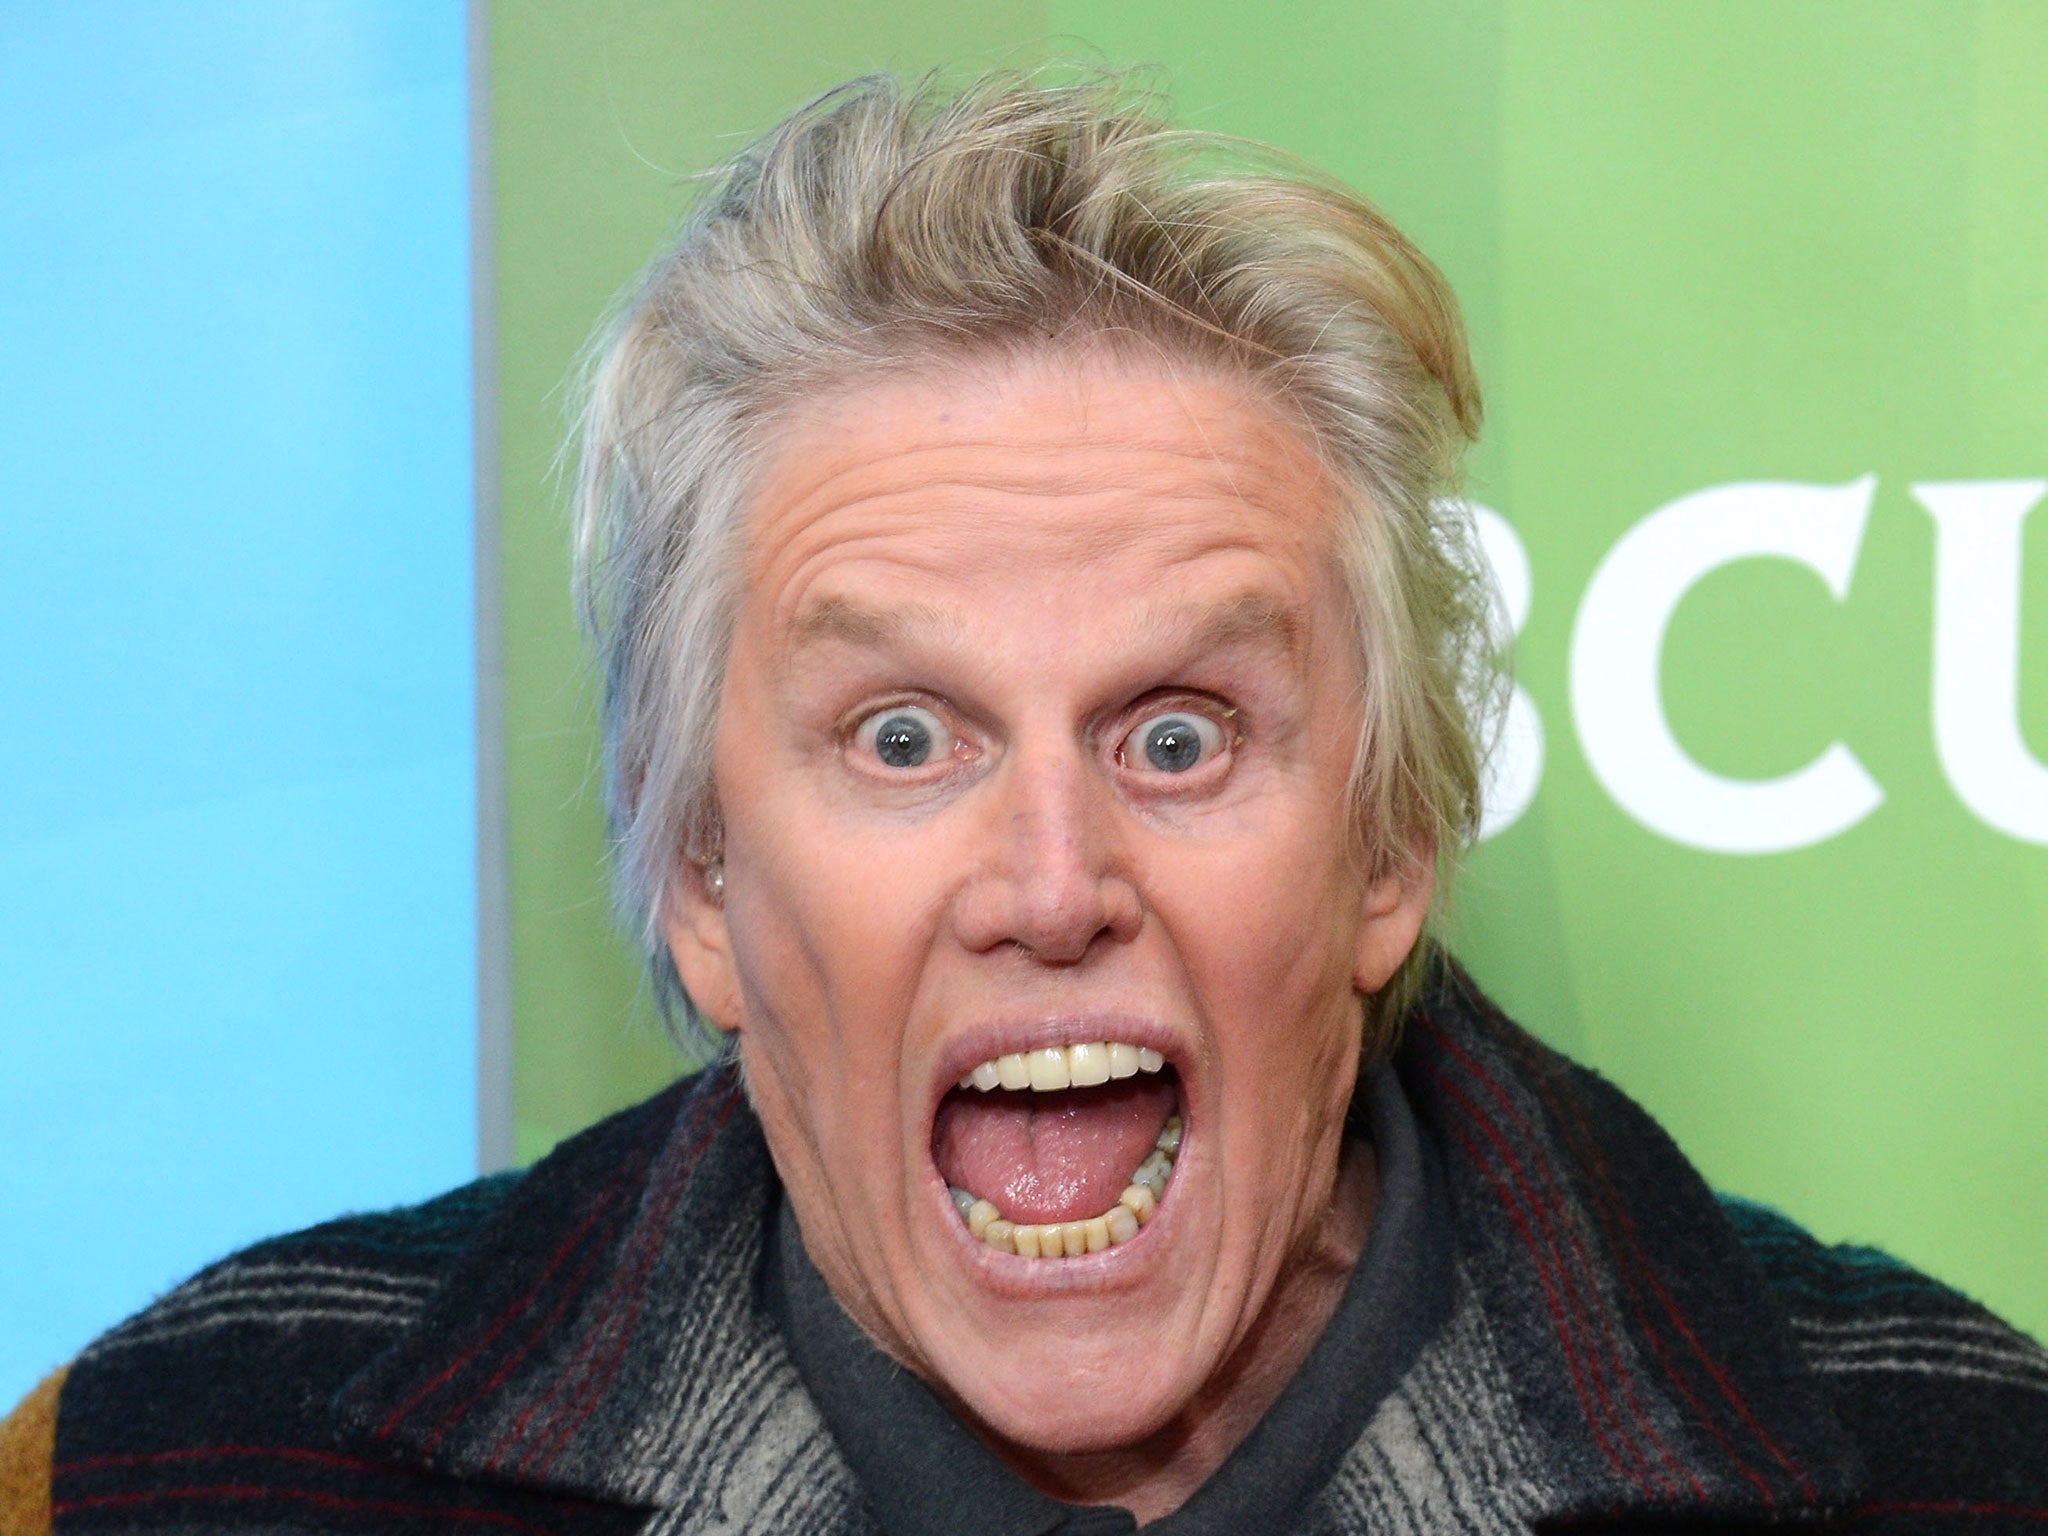 Gary Busey, who has won Celebrity Big brother